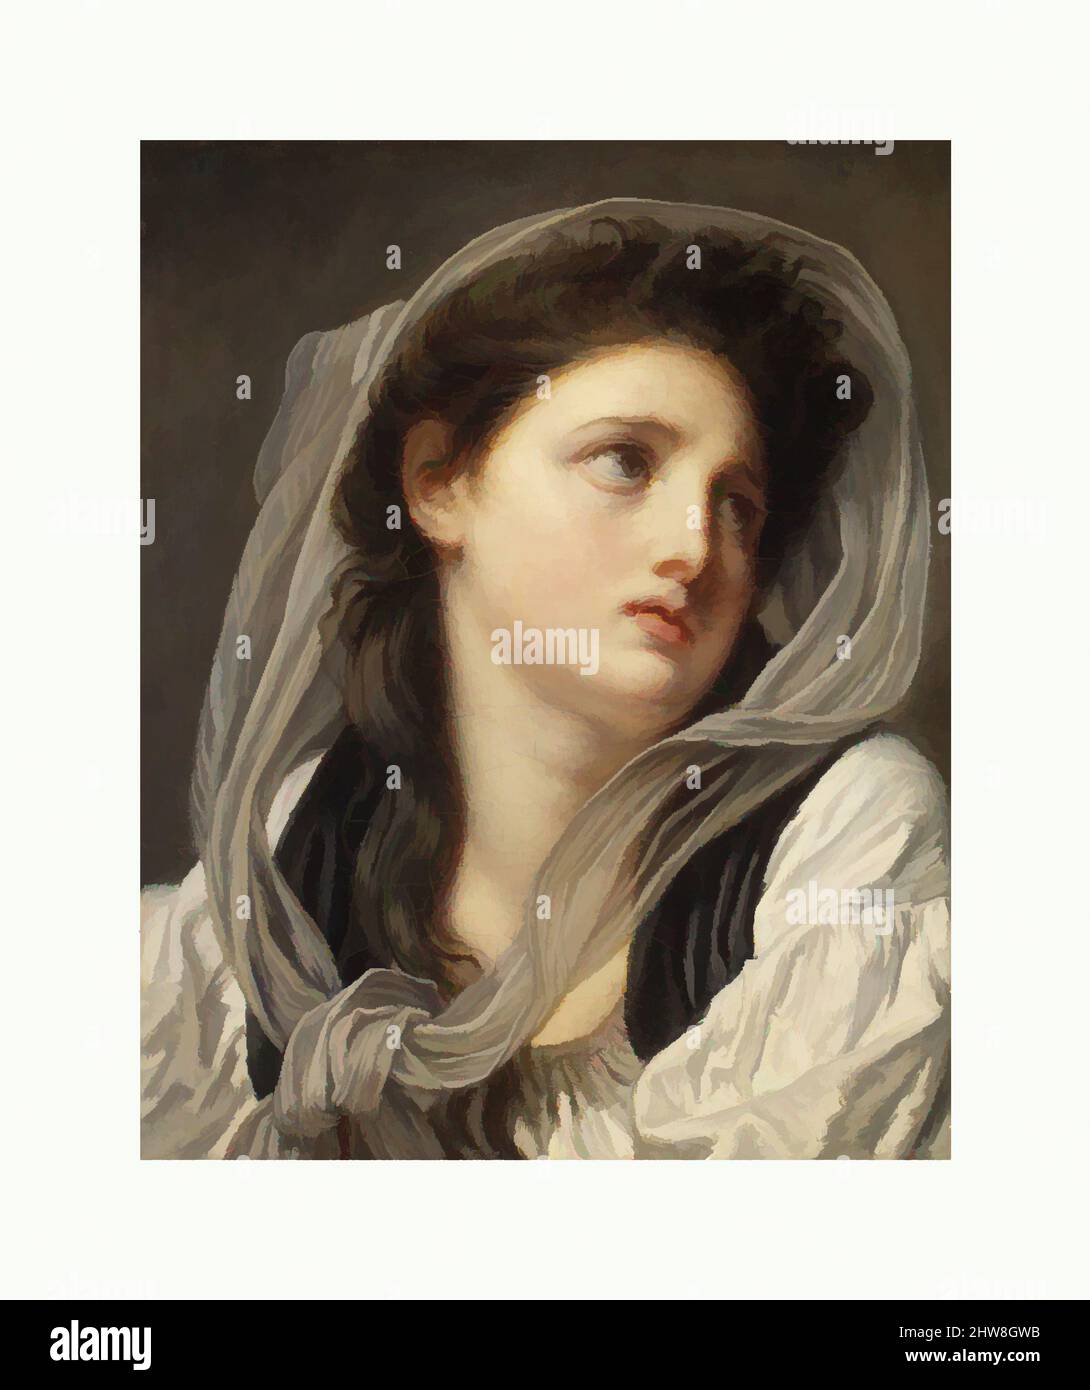 Art inspired by Head of a Young Woman, possibly 1780s, Oil on canvas, 16 1/8 x 12 3/4 in. (41 x 32.4 cm), Paintings, Jean-Baptiste Greuze (French, Tournus 1725–1805 Paris), The model’s head is slightly thrown back and her lips are parted to suggest high emotion. Her loose gown and dark, Classic works modernized by Artotop with a splash of modernity. Shapes, color and value, eye-catching visual impact on art. Emotions through freedom of artworks in a contemporary way. A timeless message pursuing a wildly creative new direction. Artists turning to the digital medium and creating the Artotop NFT Stock Photo